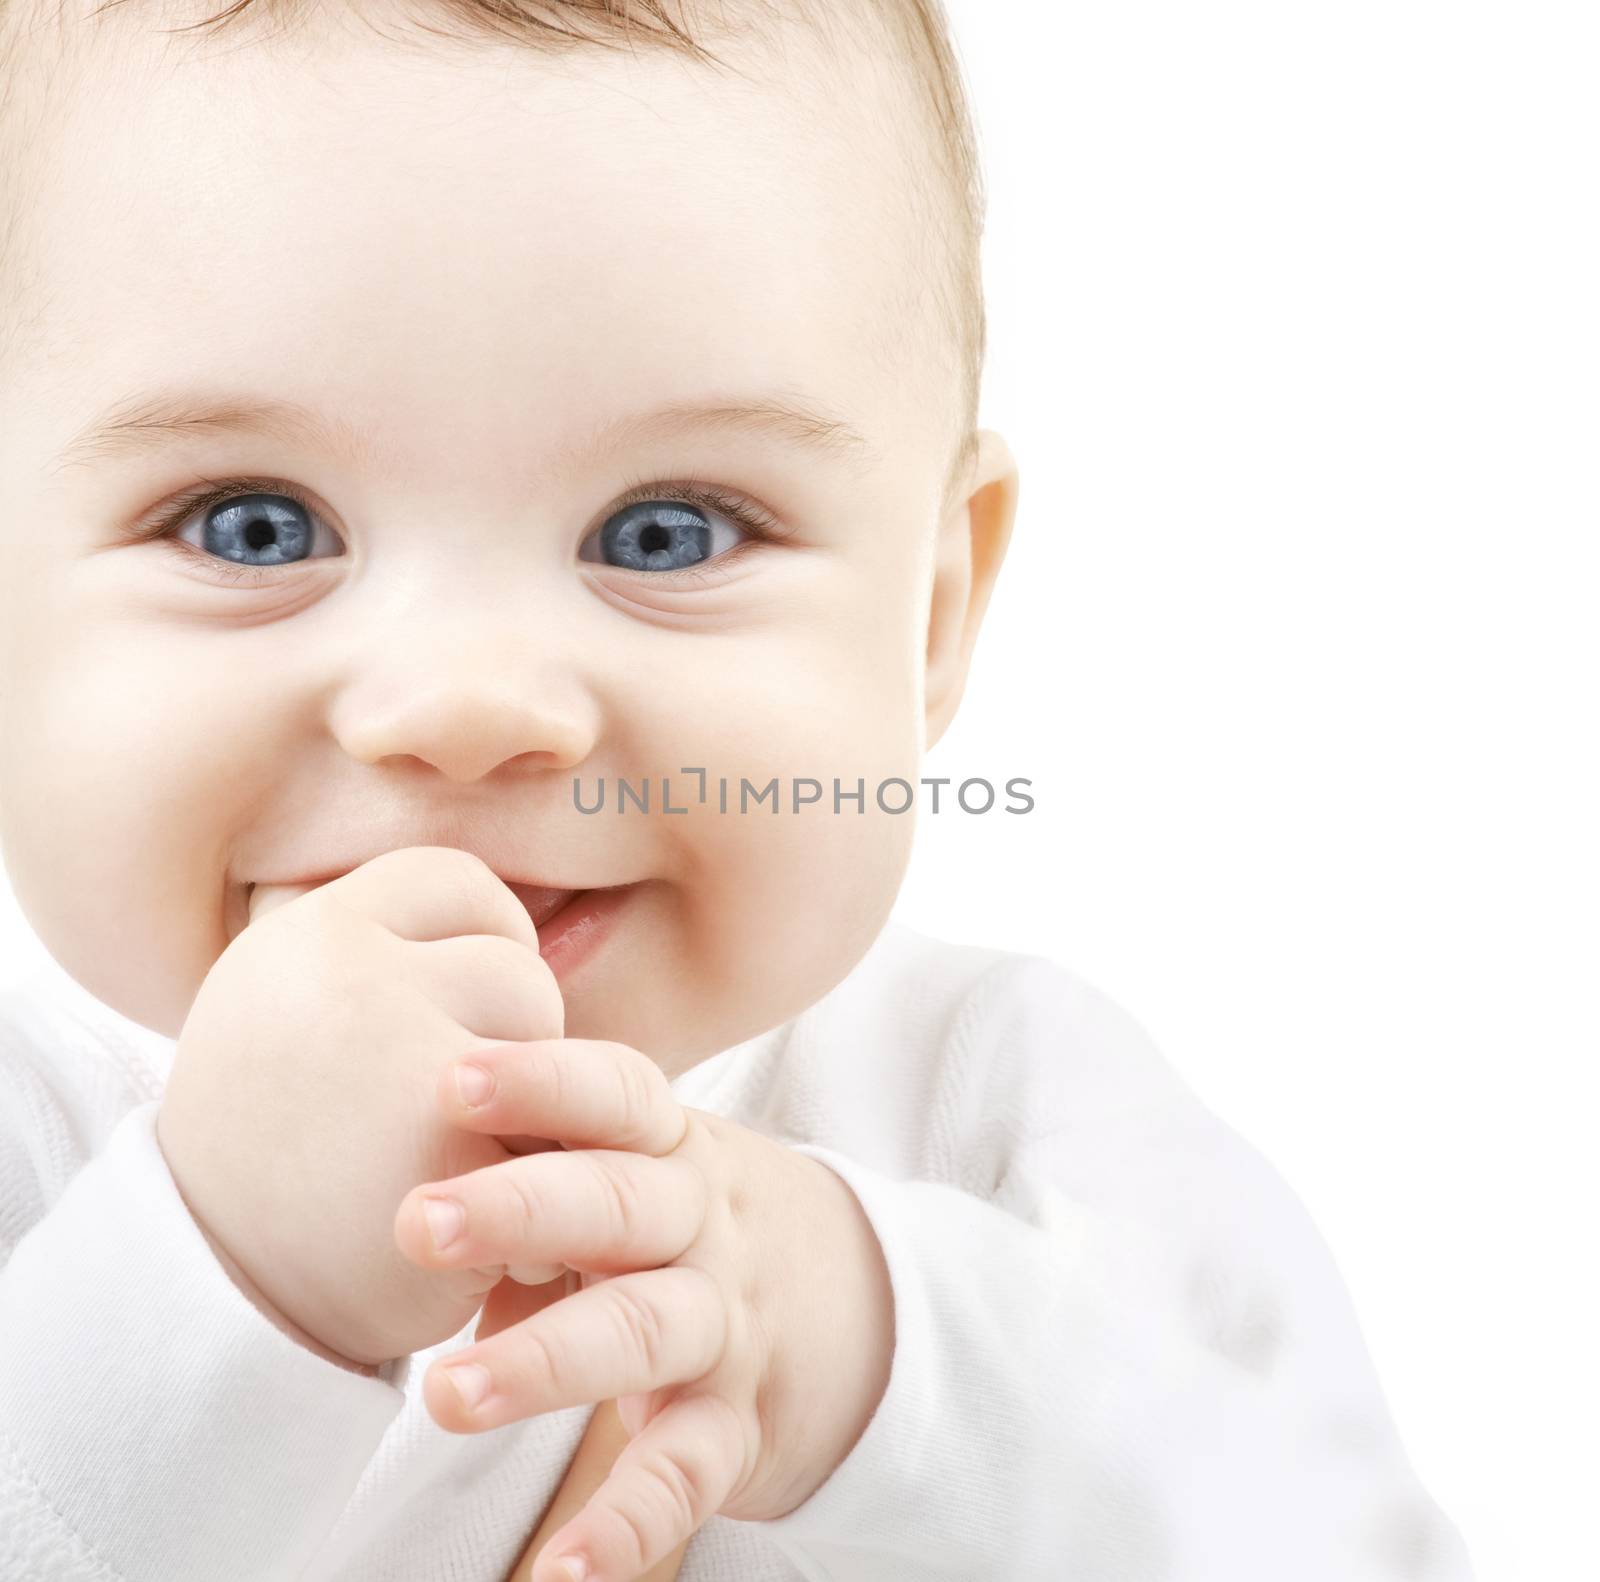 child, people and happiness concept - adorable baby